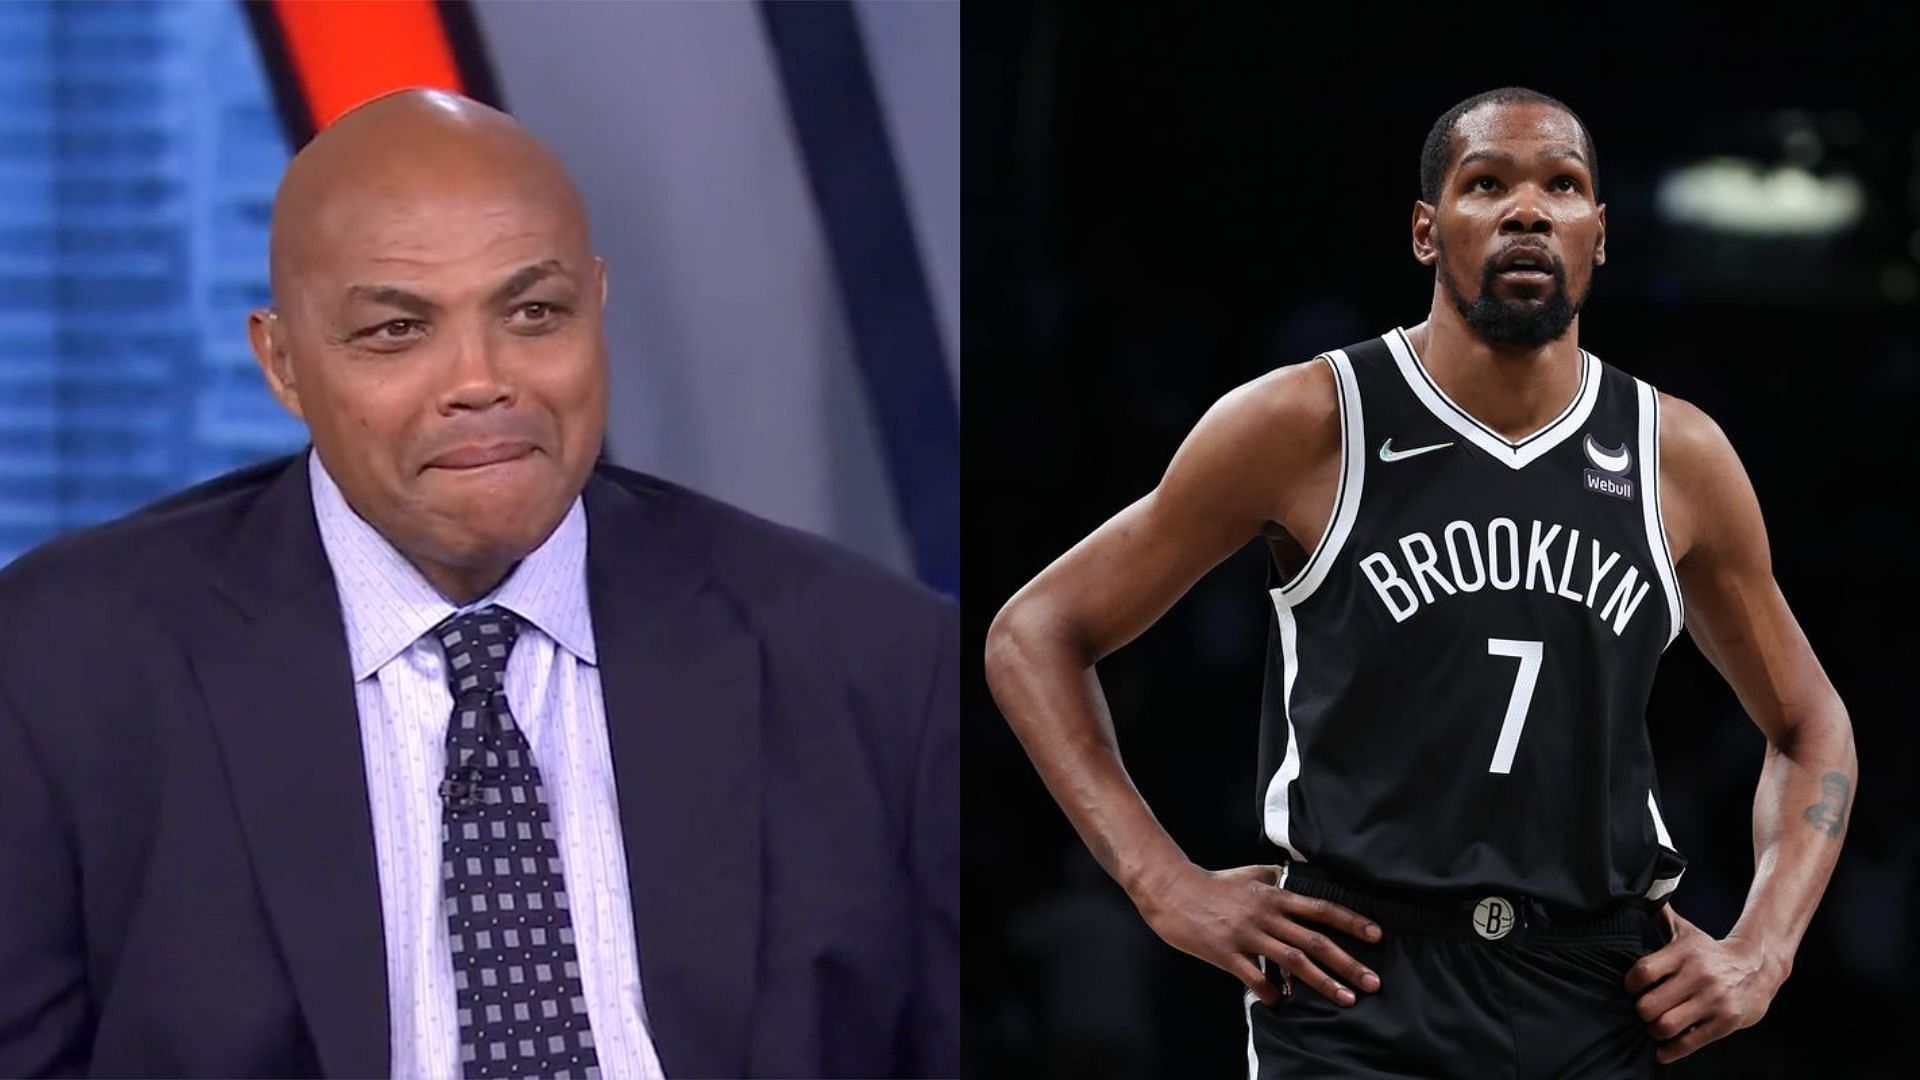 Kevin Durant fired back at Charles Barkley on Twitter